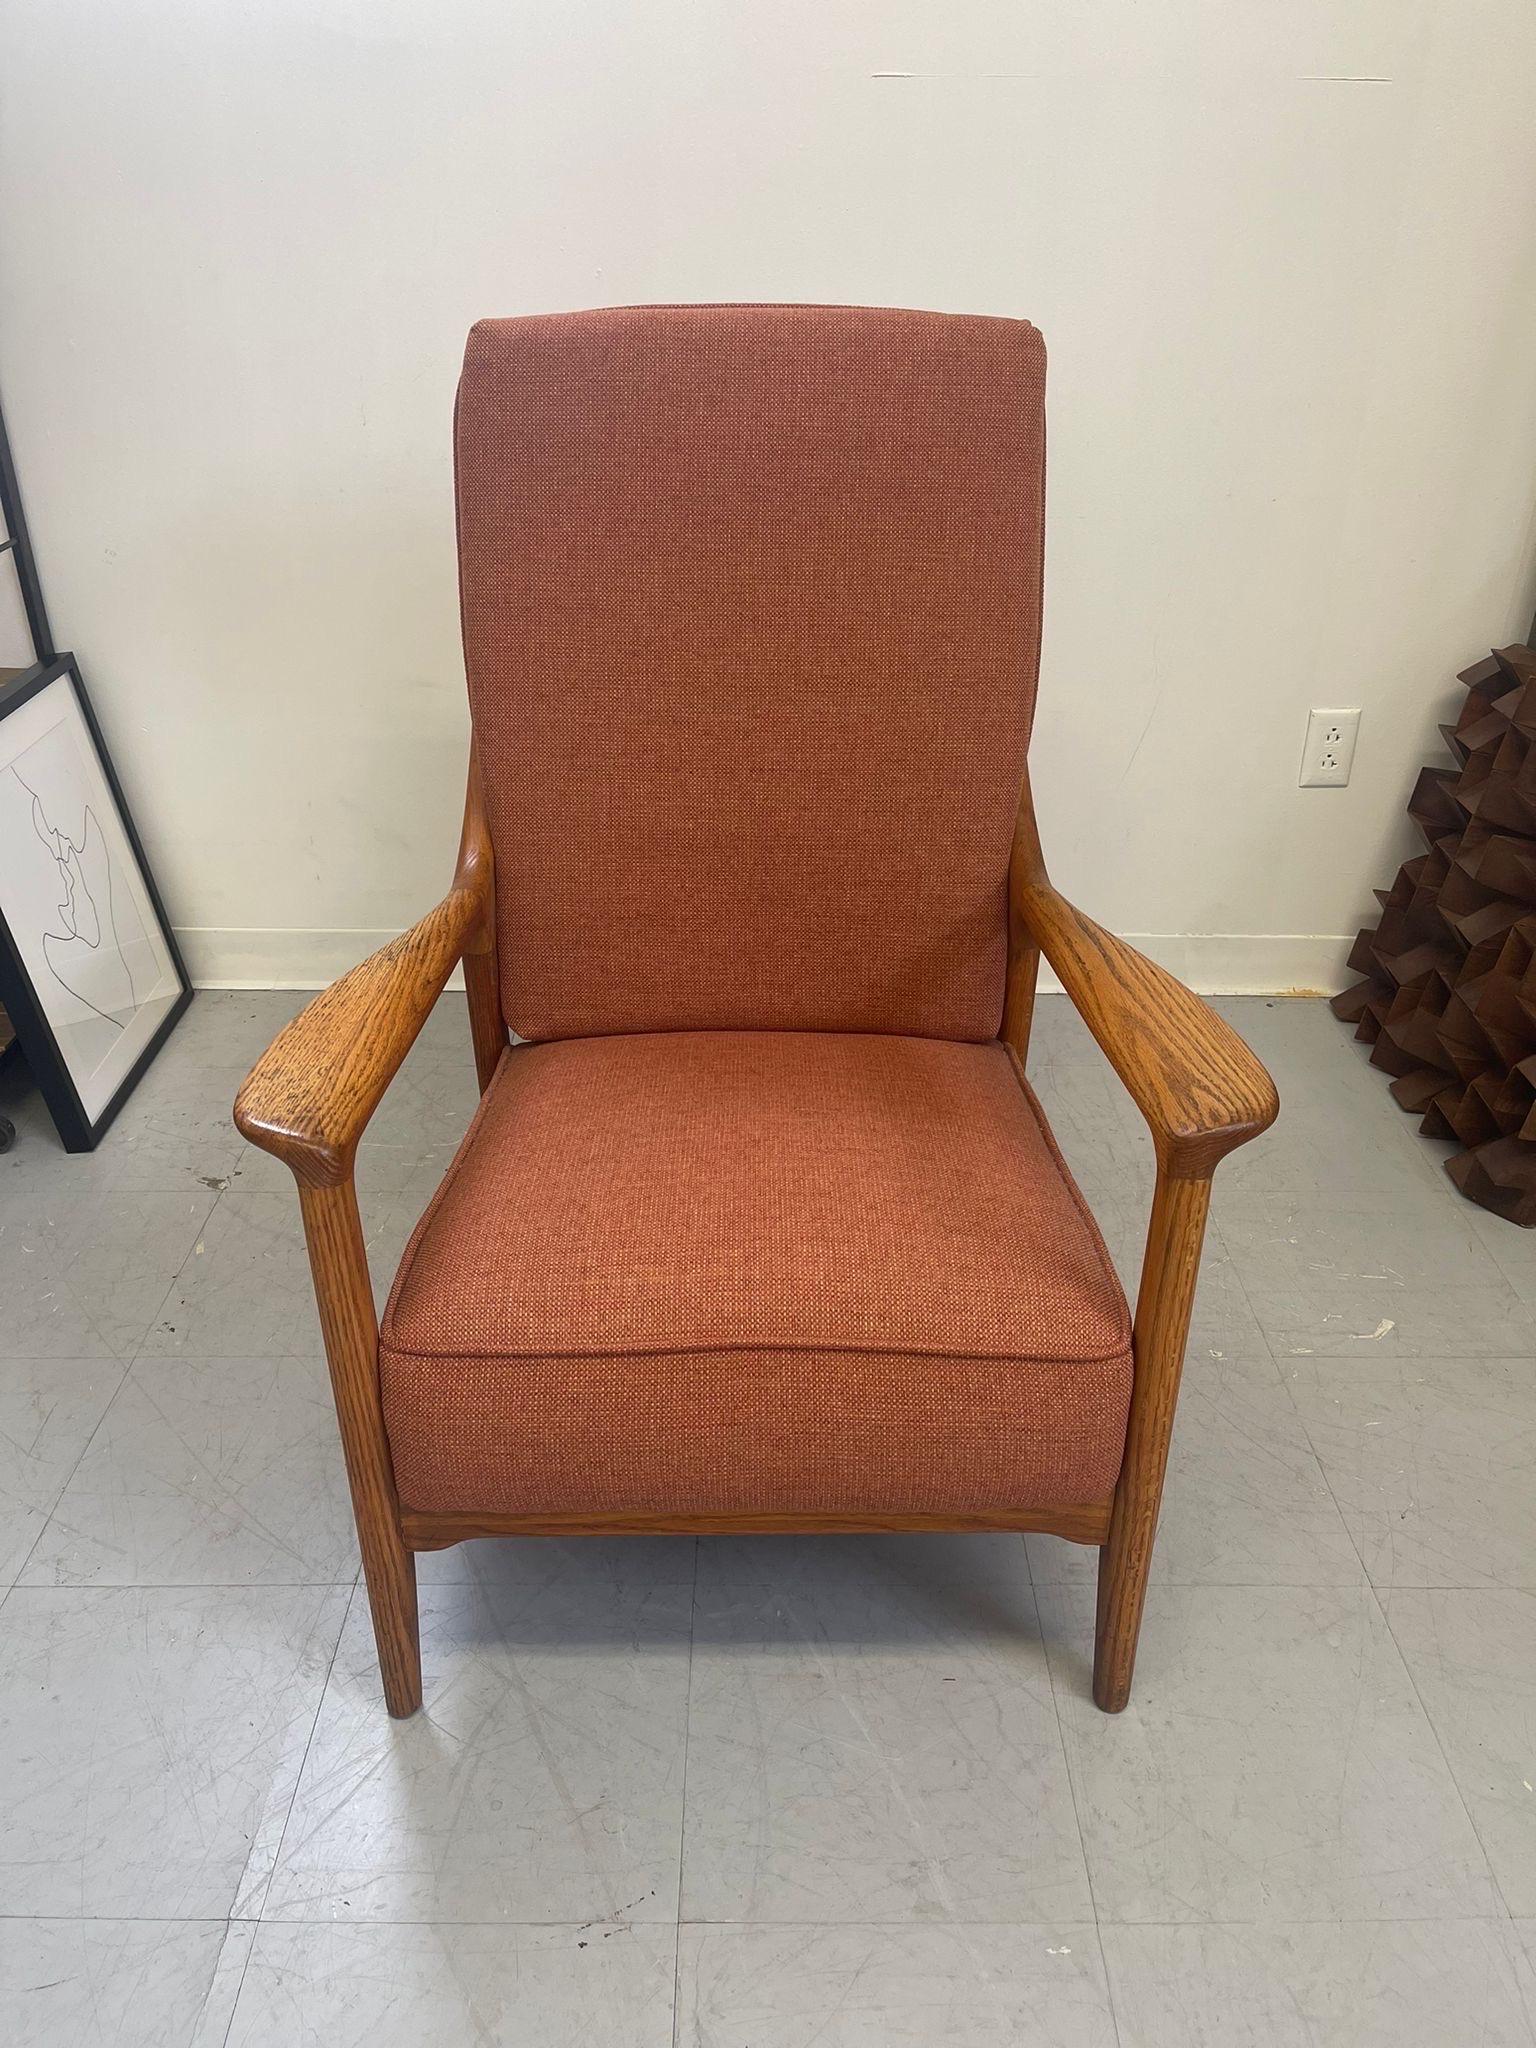 Oak Lounge Chair with Mid Century Modern Lines Throughout and Wood Slatted Back. This Chair Slightly Reclines as Shown In Picture.Recently Reupholstered in a textured Orange Fabric.

Dimensions. 27 W ; 33 1/2 D ; 37 H